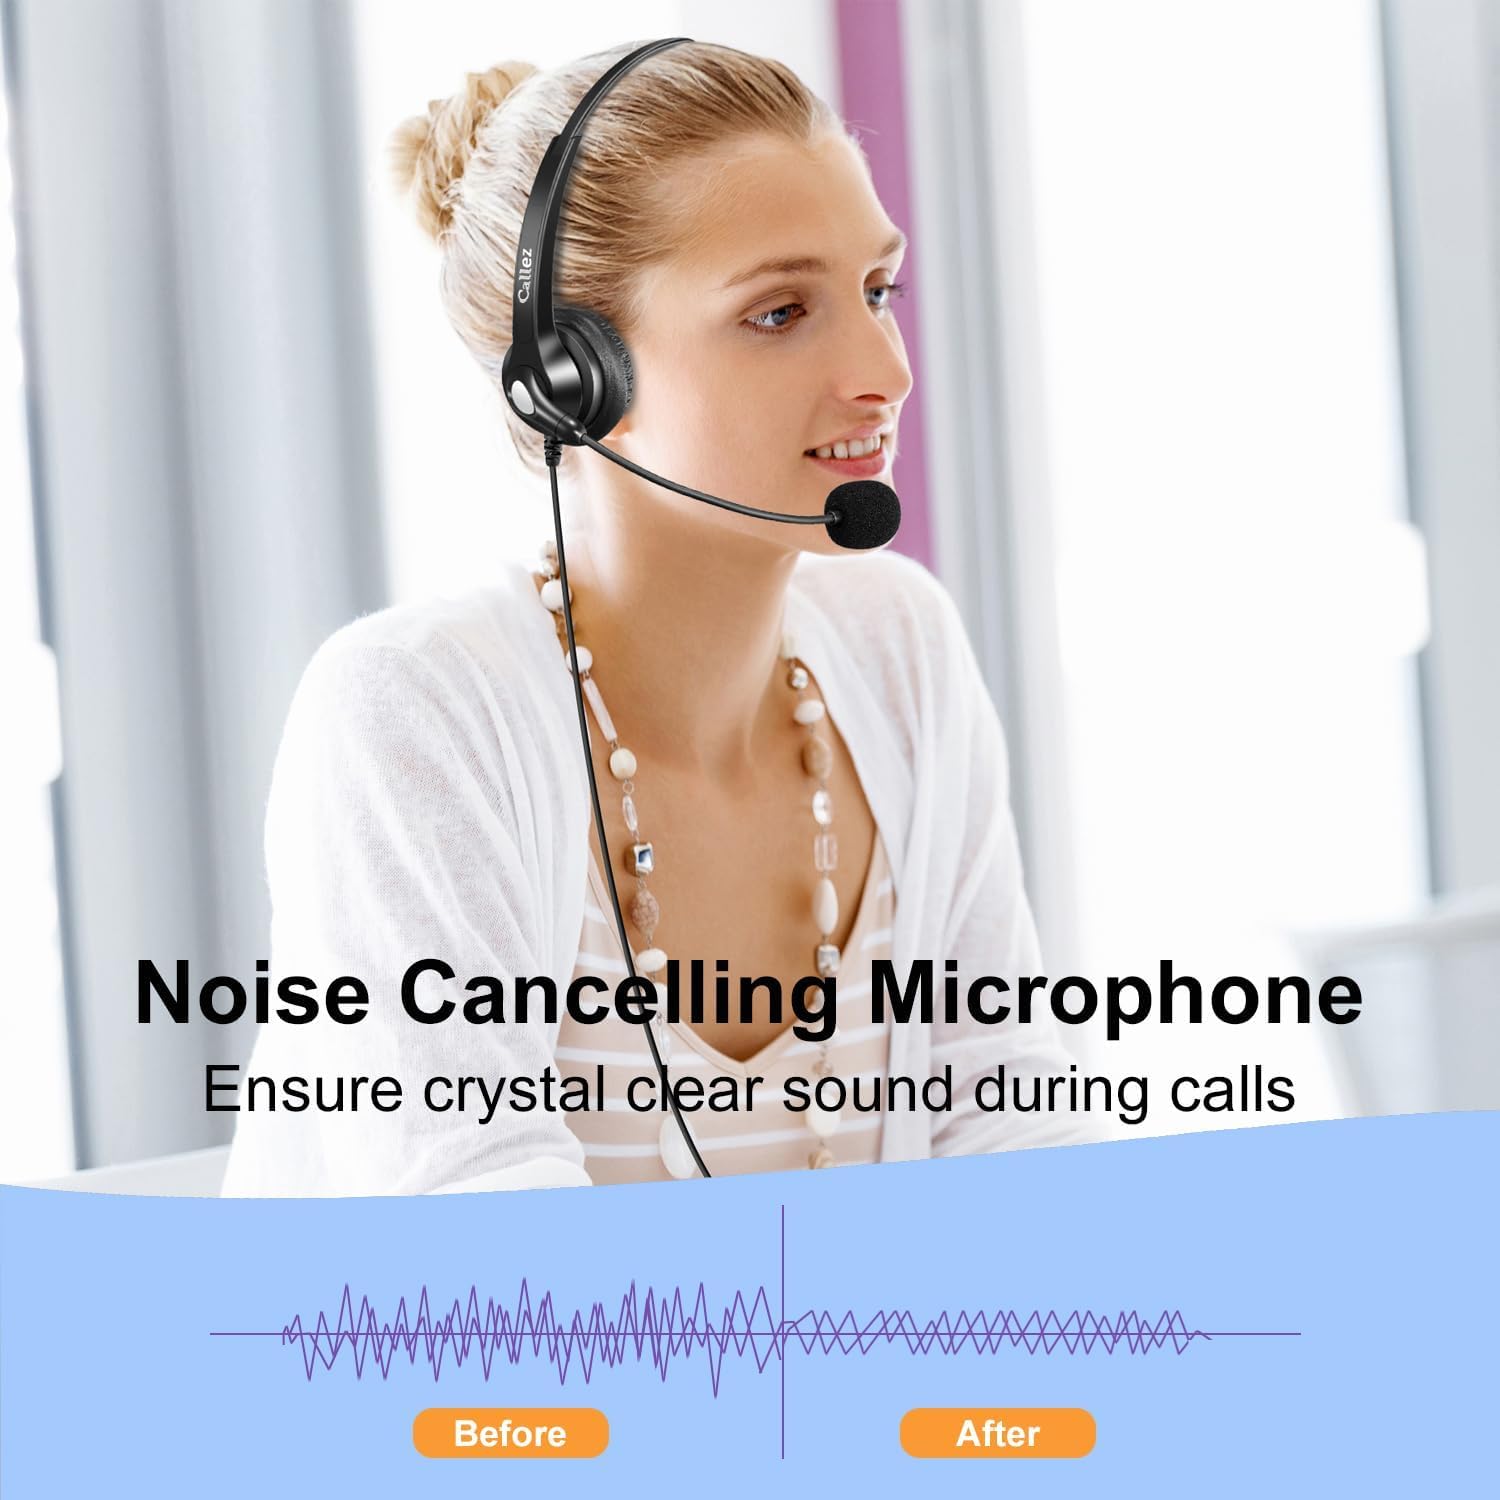 Callez Office Phone Headset with Microphone Noise Cancelling, RJ9 Telephone Headsets Compatible with Yealink VoIP Phone T46S T48S T42S T23G T27G T29G T33G T21P T43U T46U T53W T54W Grandstream Snom